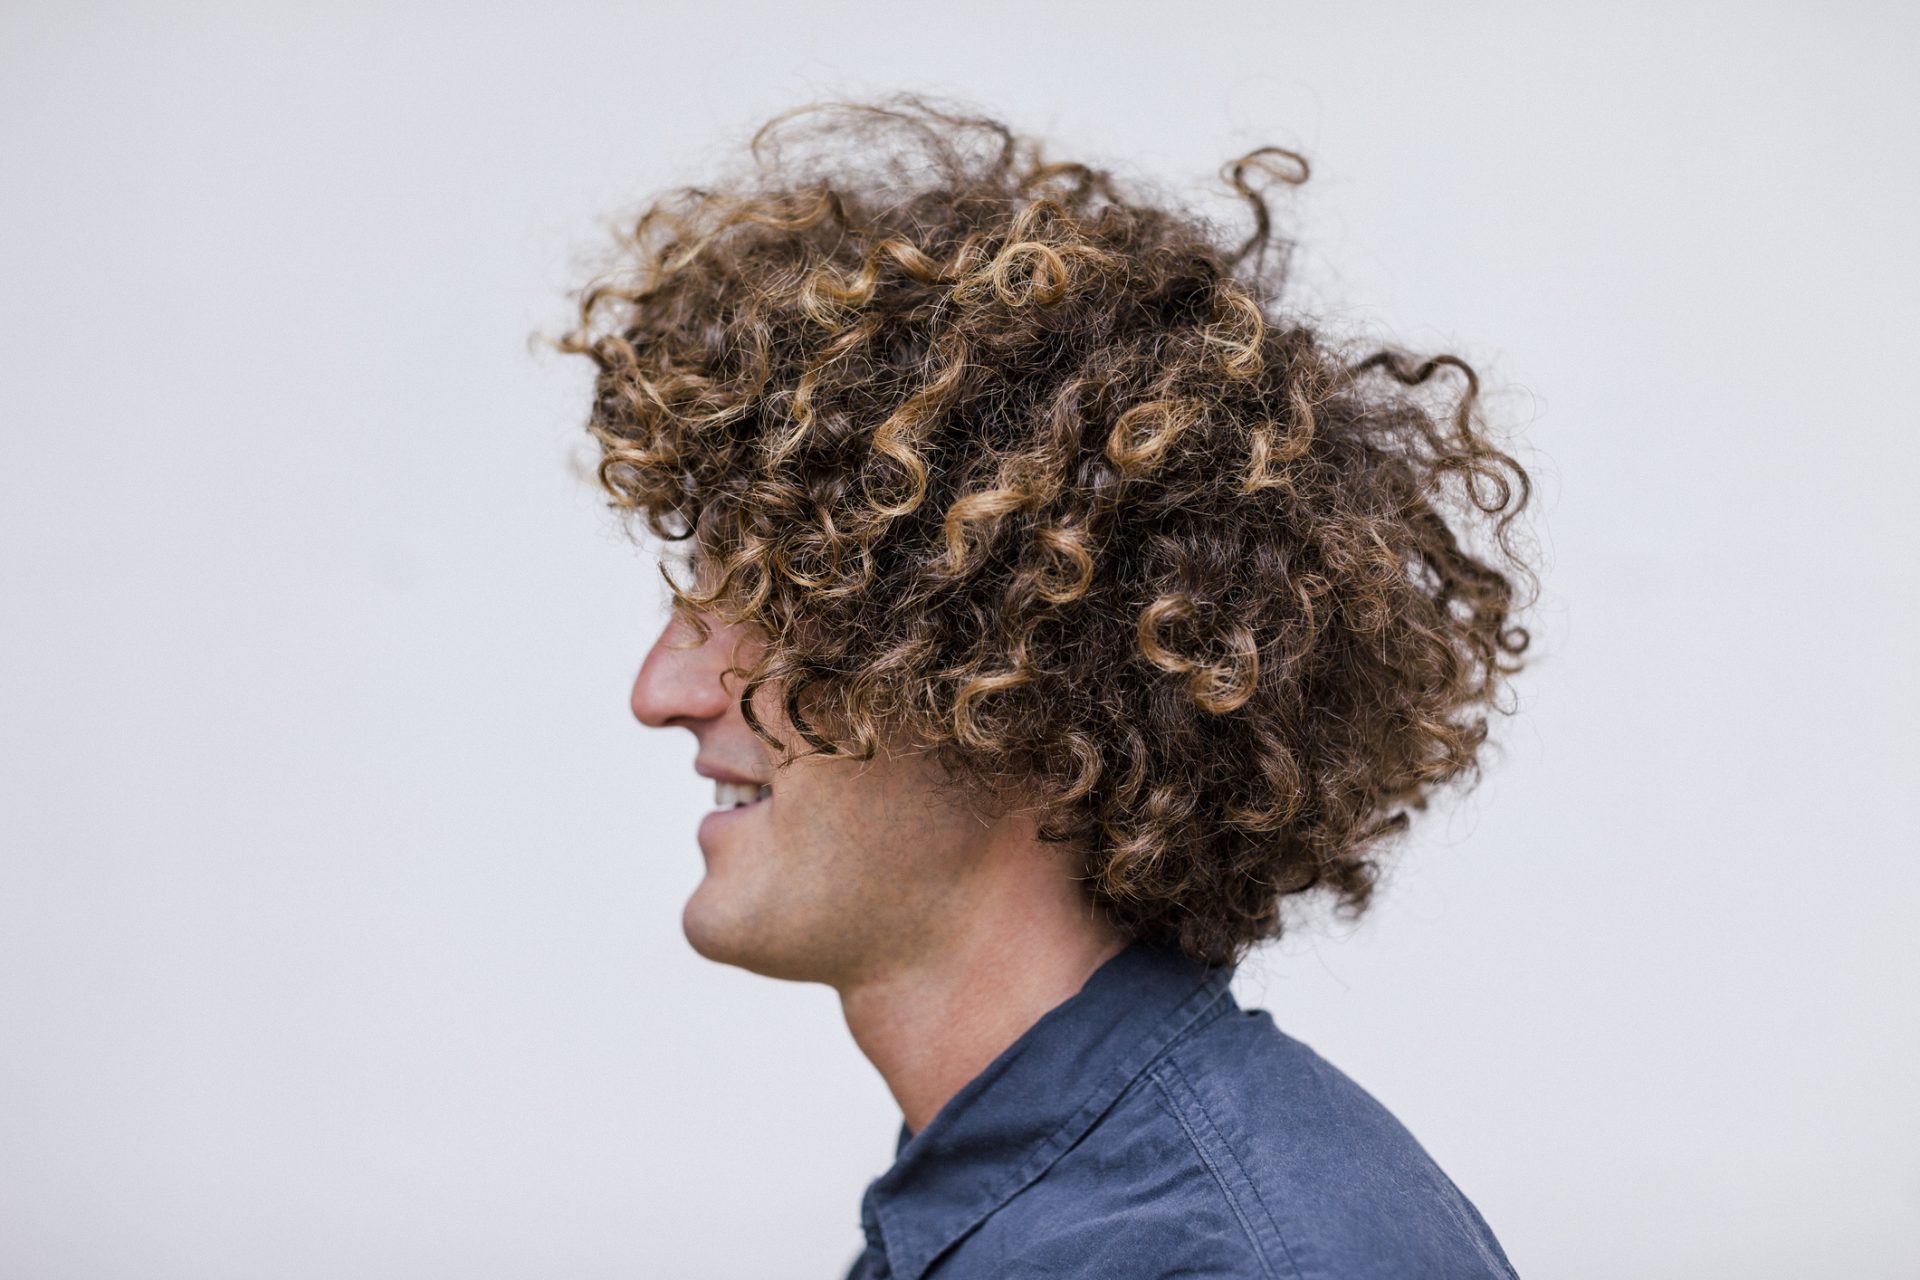 Have you ever wondered why some people have curly hair?